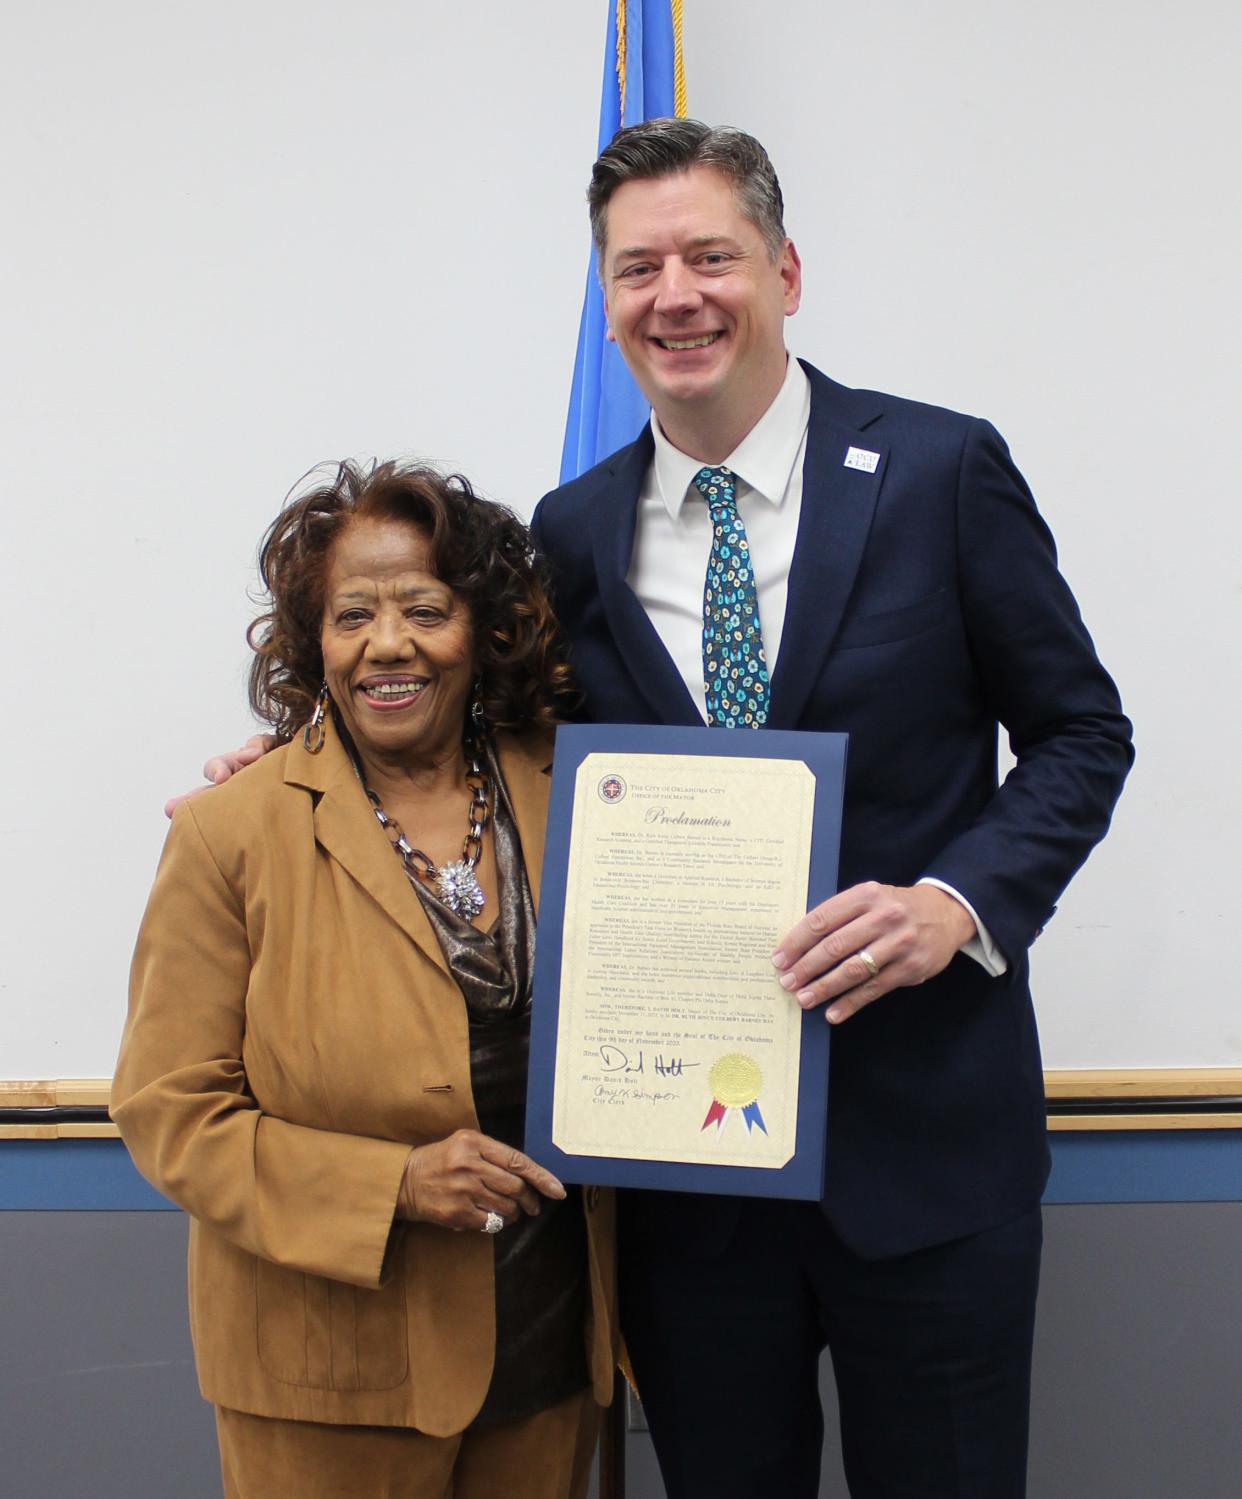 While at the Ralph Ellison Library, 2000 NE 23rd St, on Friday, Oklahoma City Mayor David Holt, left, honored Dr. Ruth Joyce Colbert Barnes, right, by proclaiming Nov. 11, 2023, as Dr. Ruth Joyce Colbert Barnes Day in the City of Oklahoma City. [PHOTO PROVIDED]